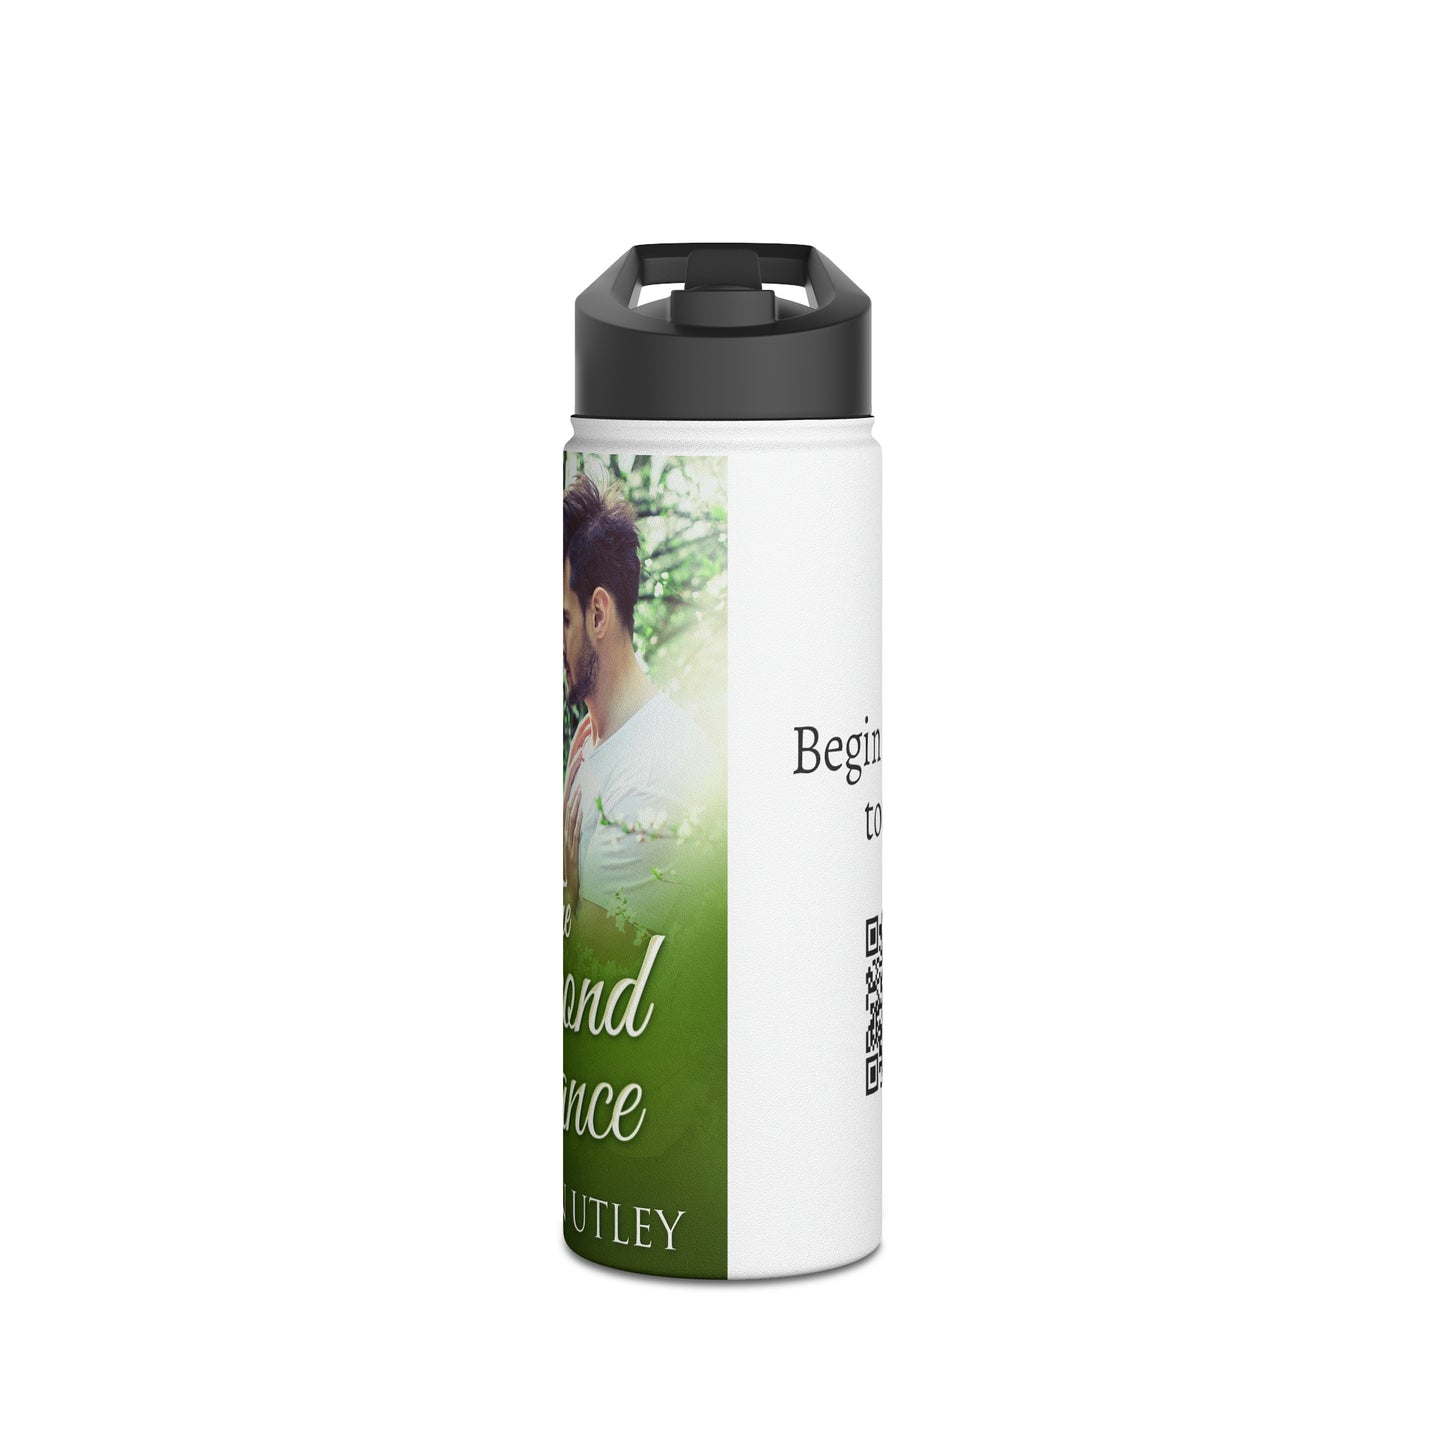 The Second Chance - Stainless Steel Water Bottle